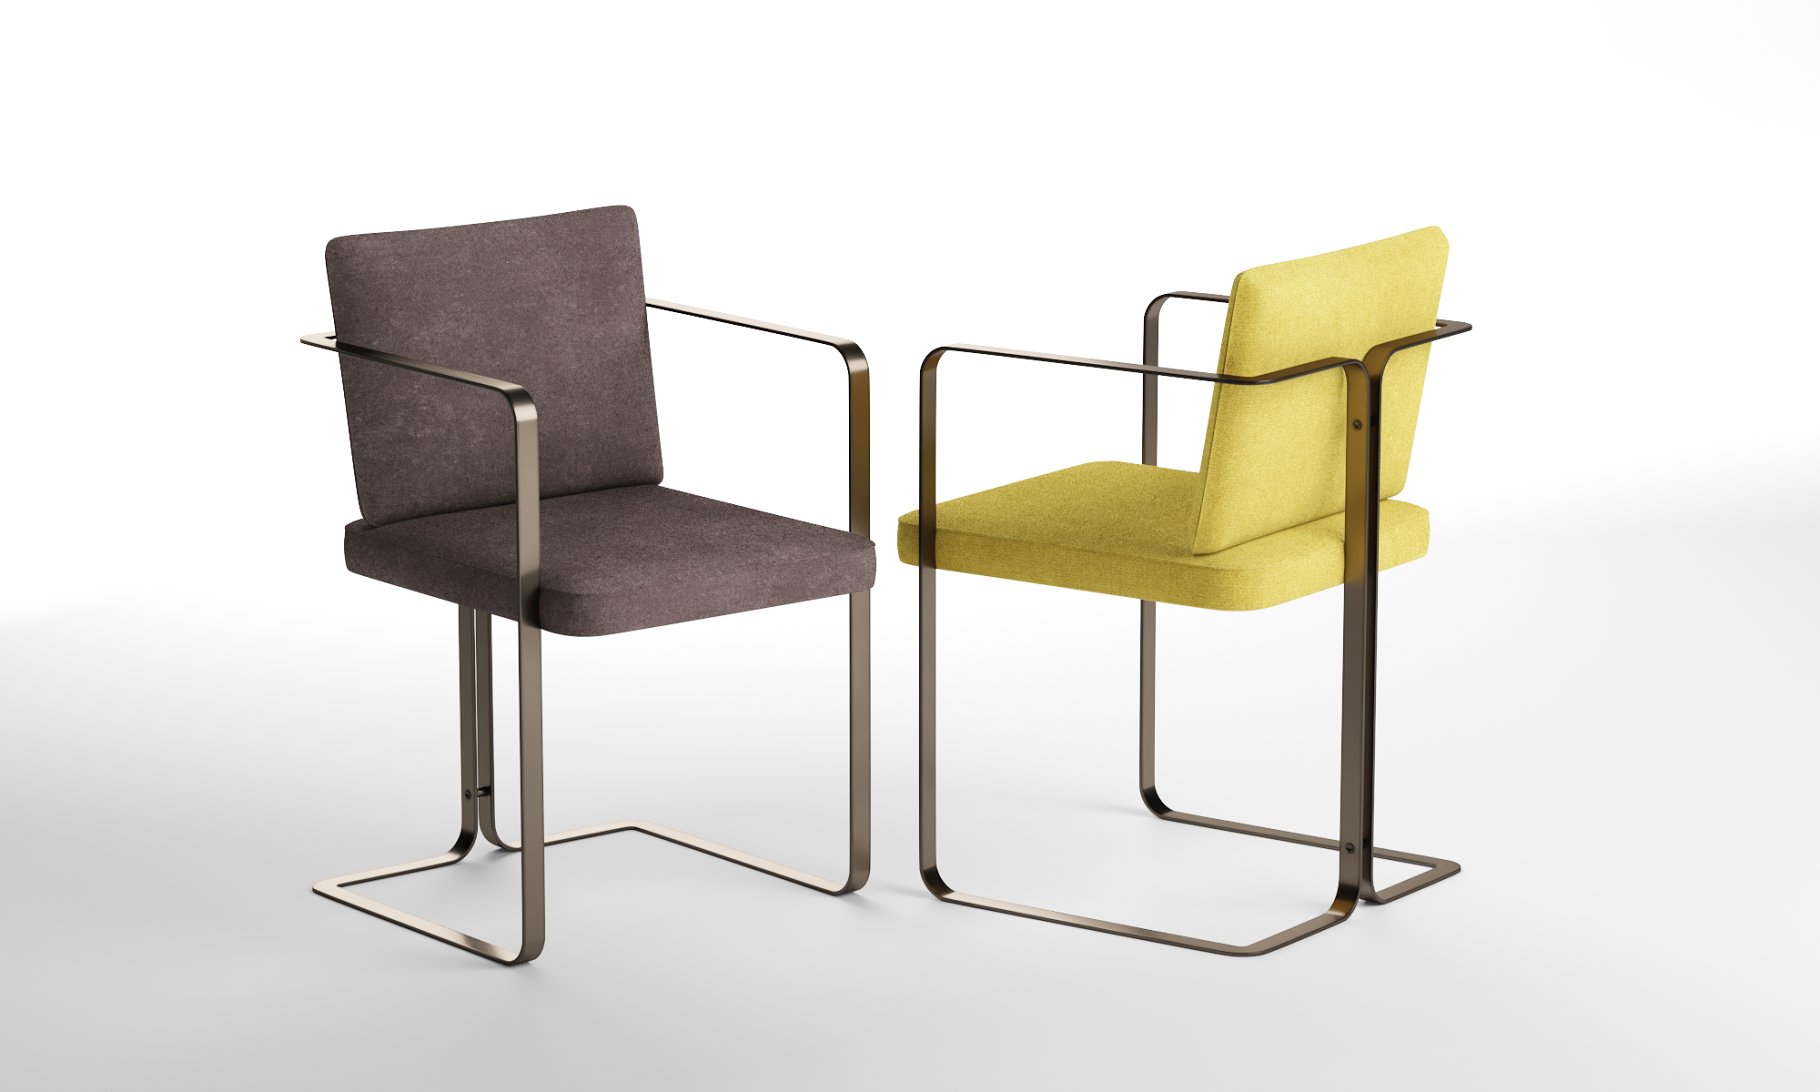 Rendering of an adorable 3d model of an armchair in two colors